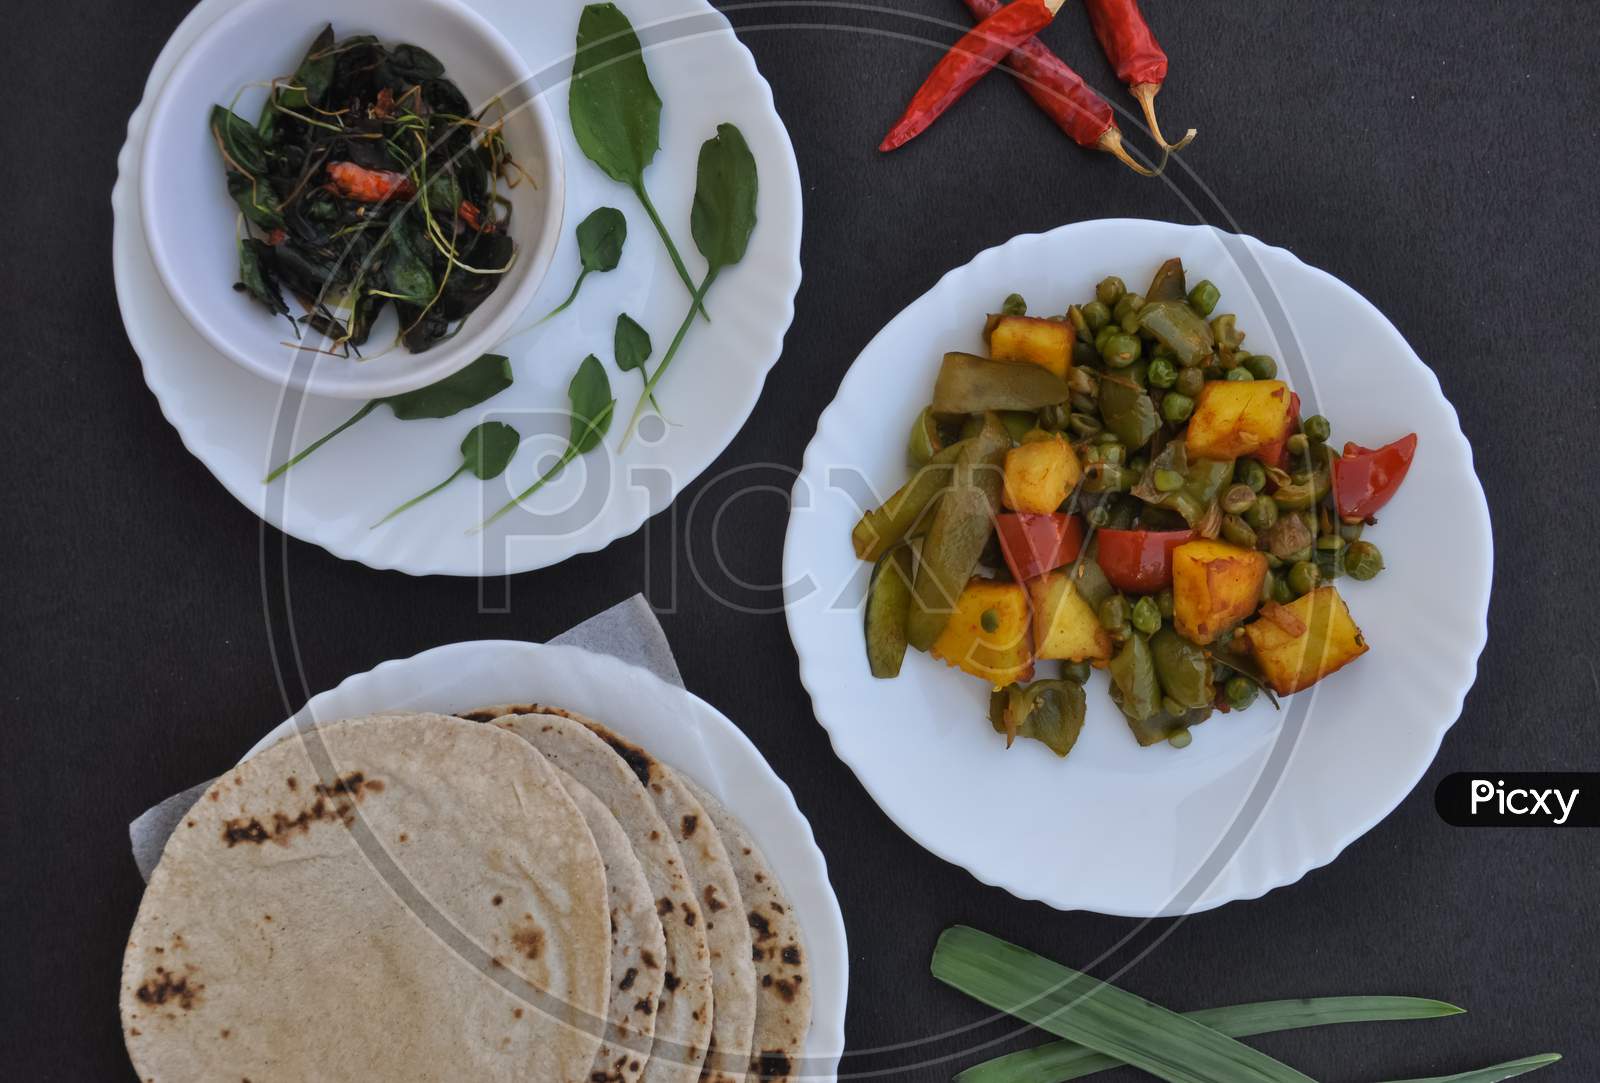 Photo of matar paneer mix veg, saag (greens) and roti (Indian bread) on white plates over black background.